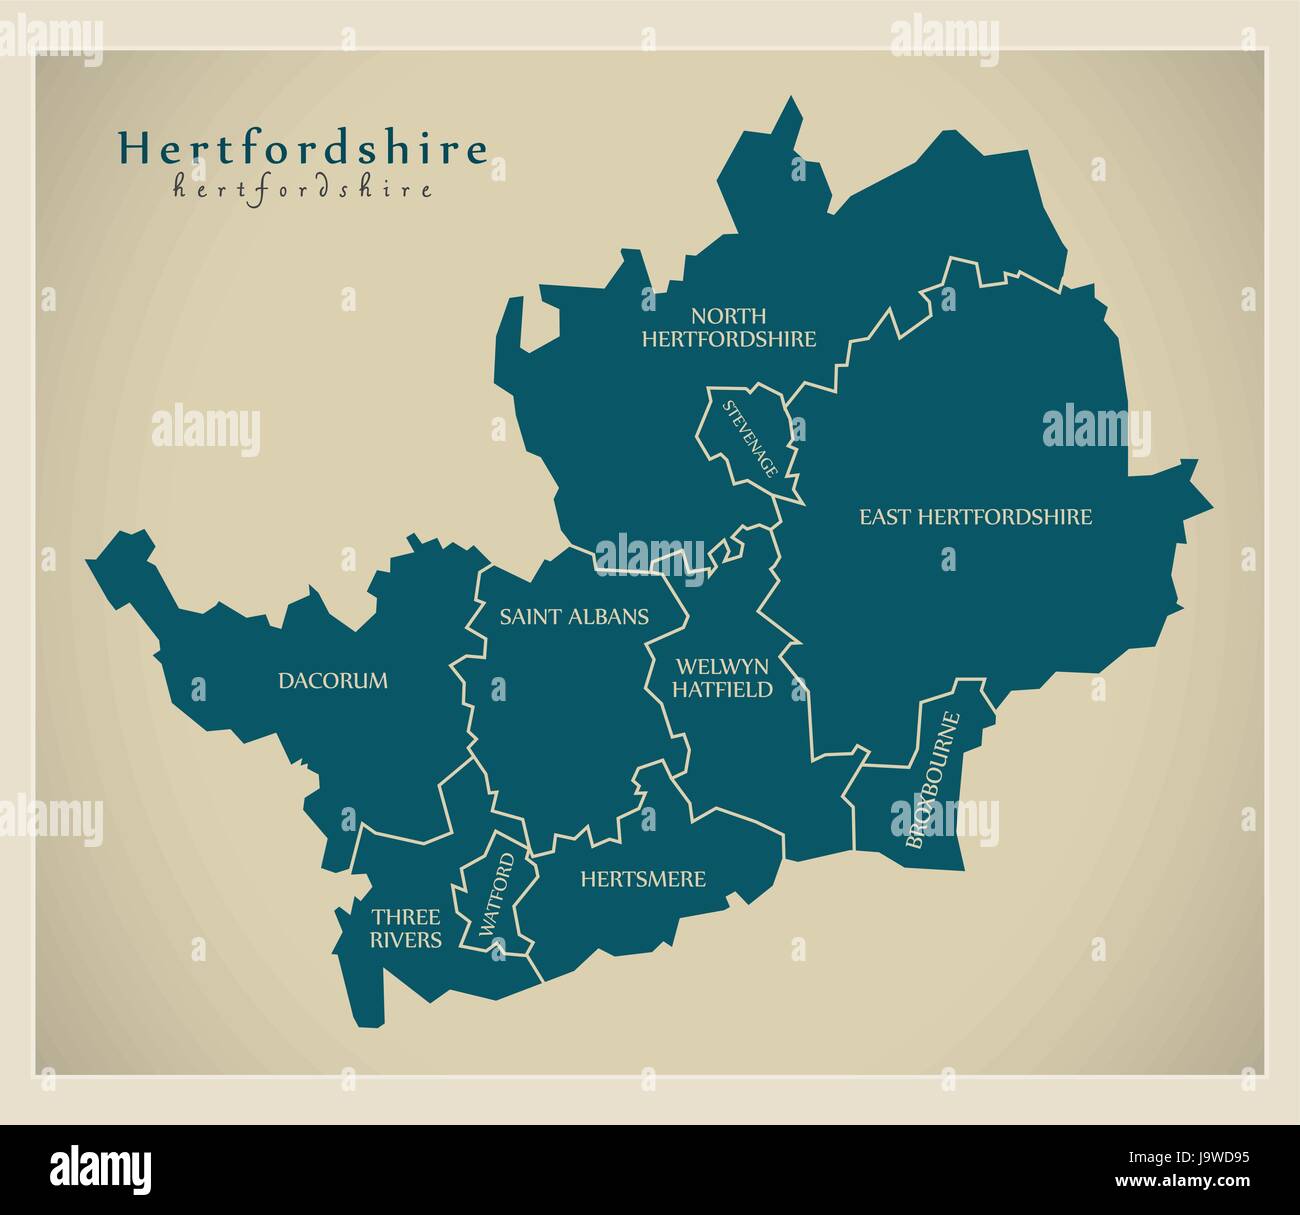 Hertfordshire map Stock Vector Images - Alamy